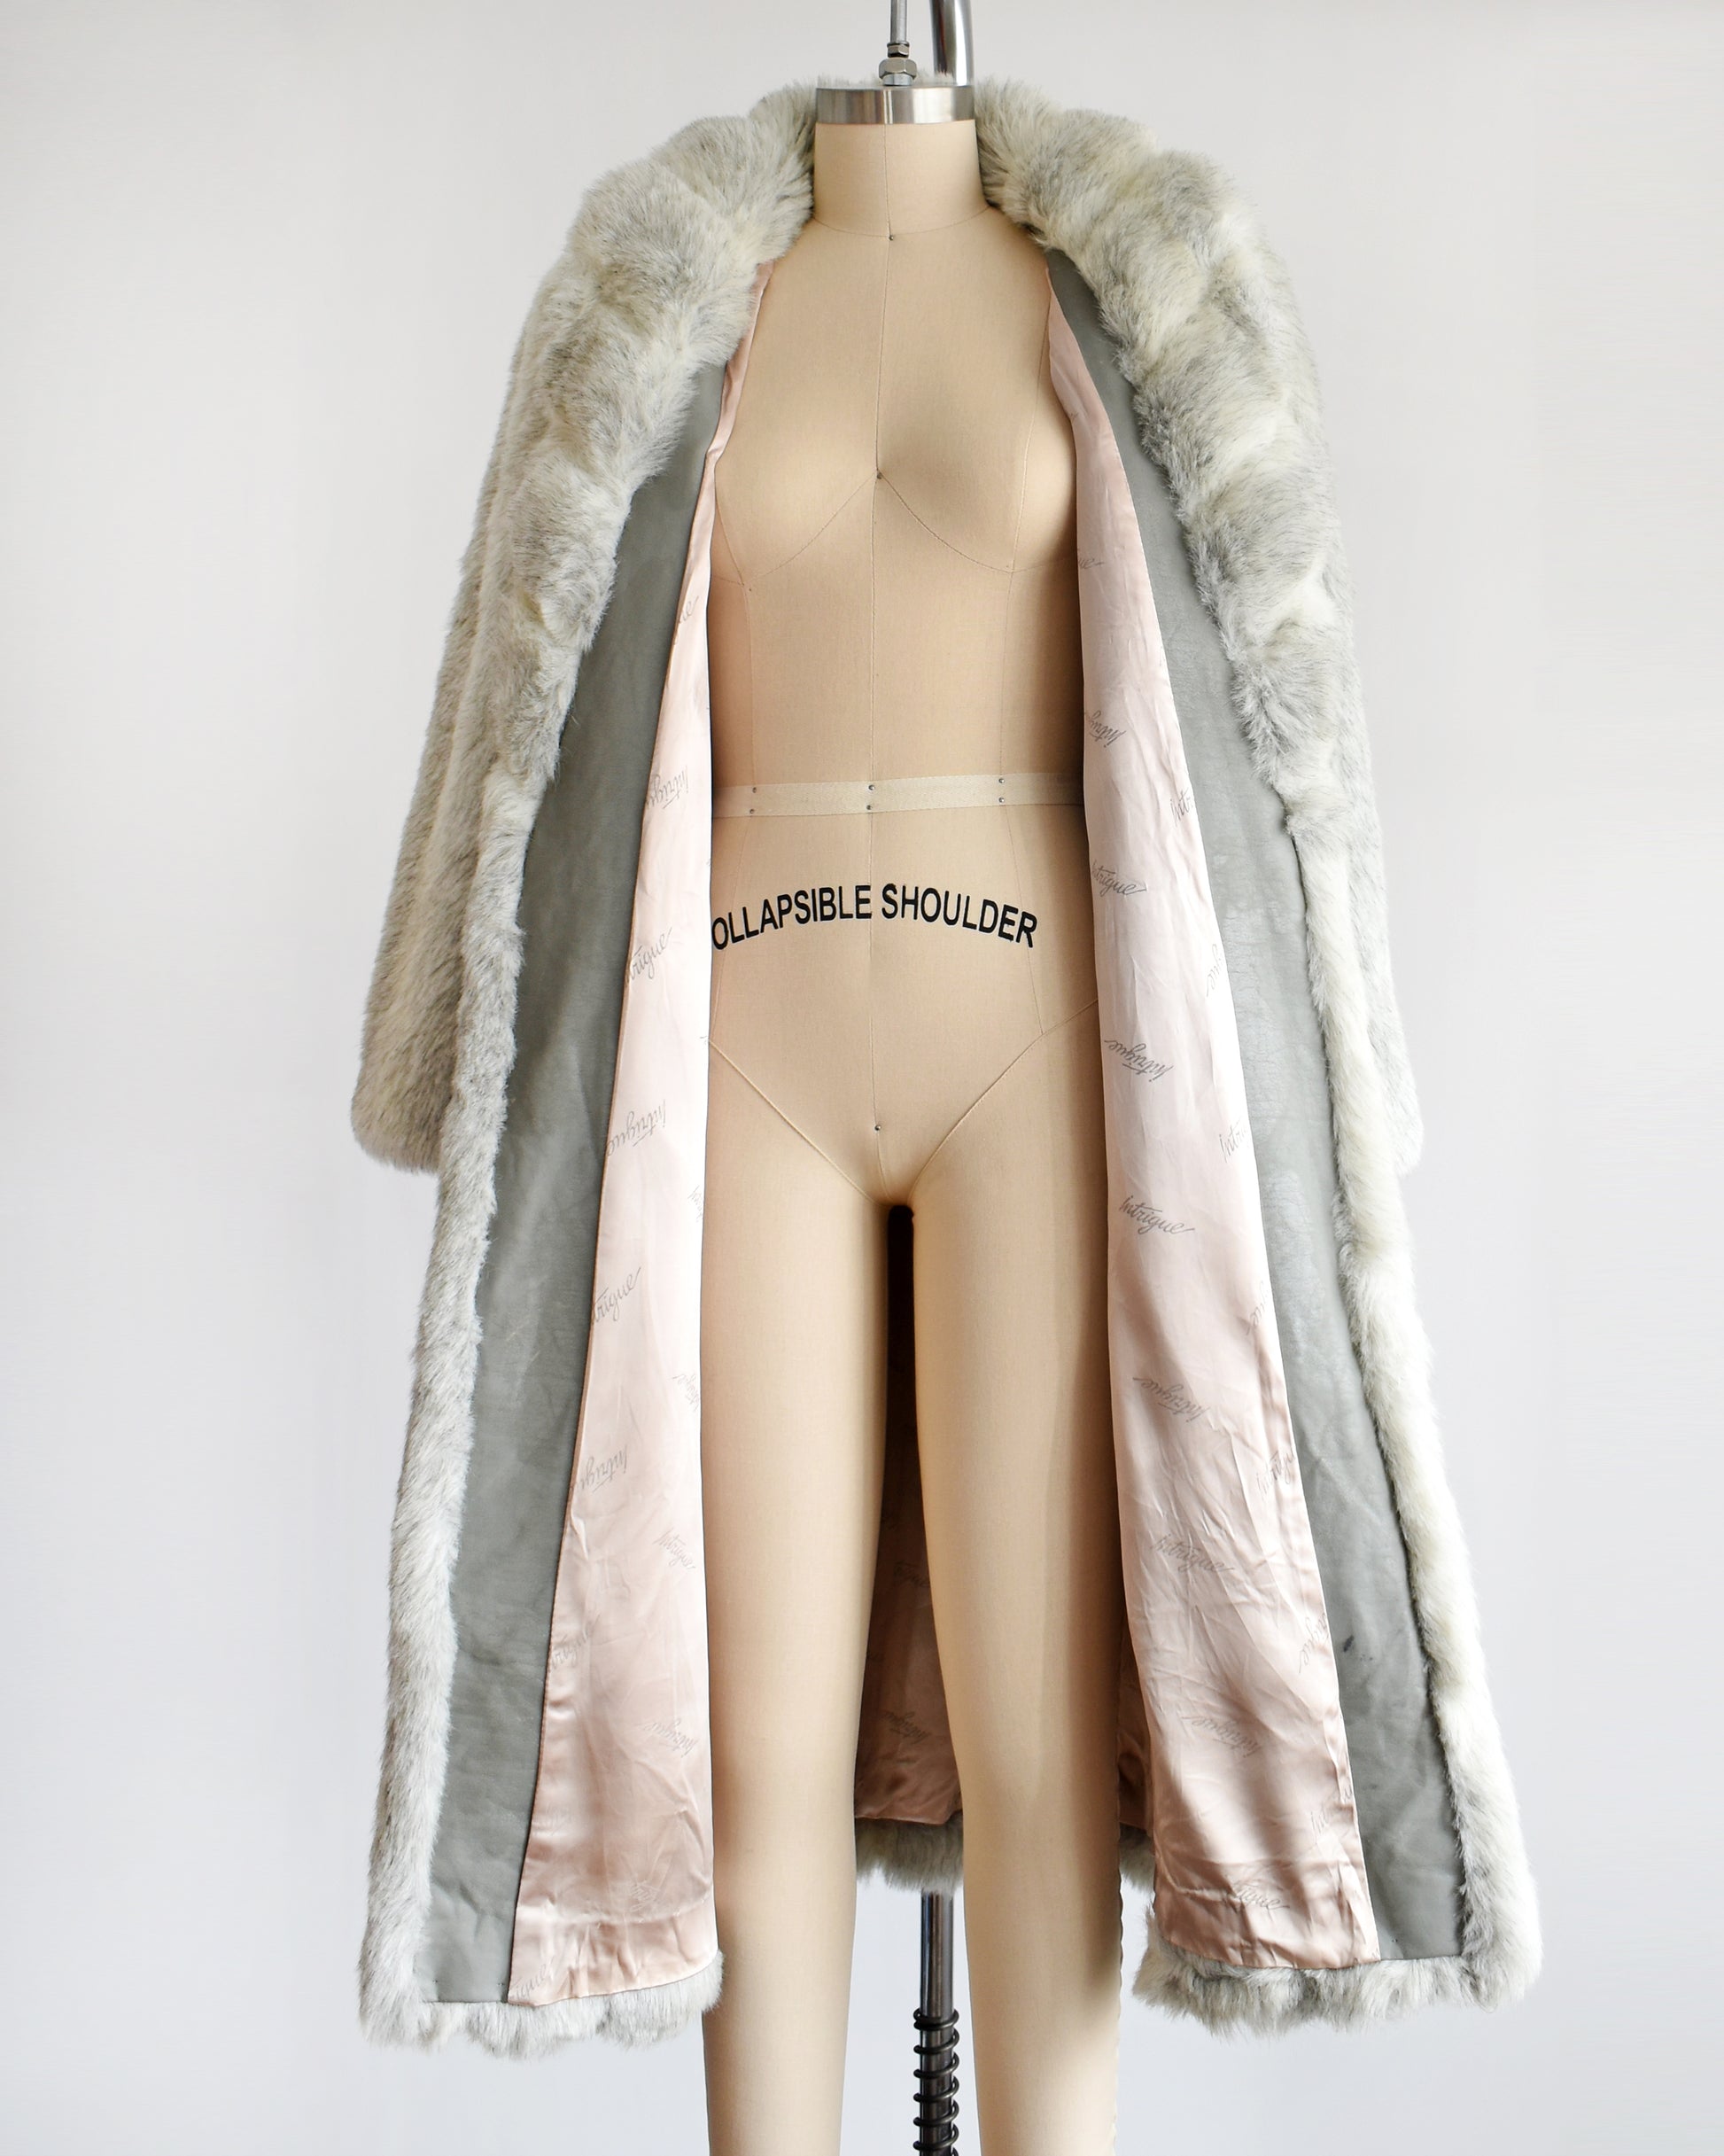 A vintage 1980s  cream colored faux fur coat with light and dark gray stripes.  The coat is open in this photo showing the light pink lining and gray faux leather inside trim.